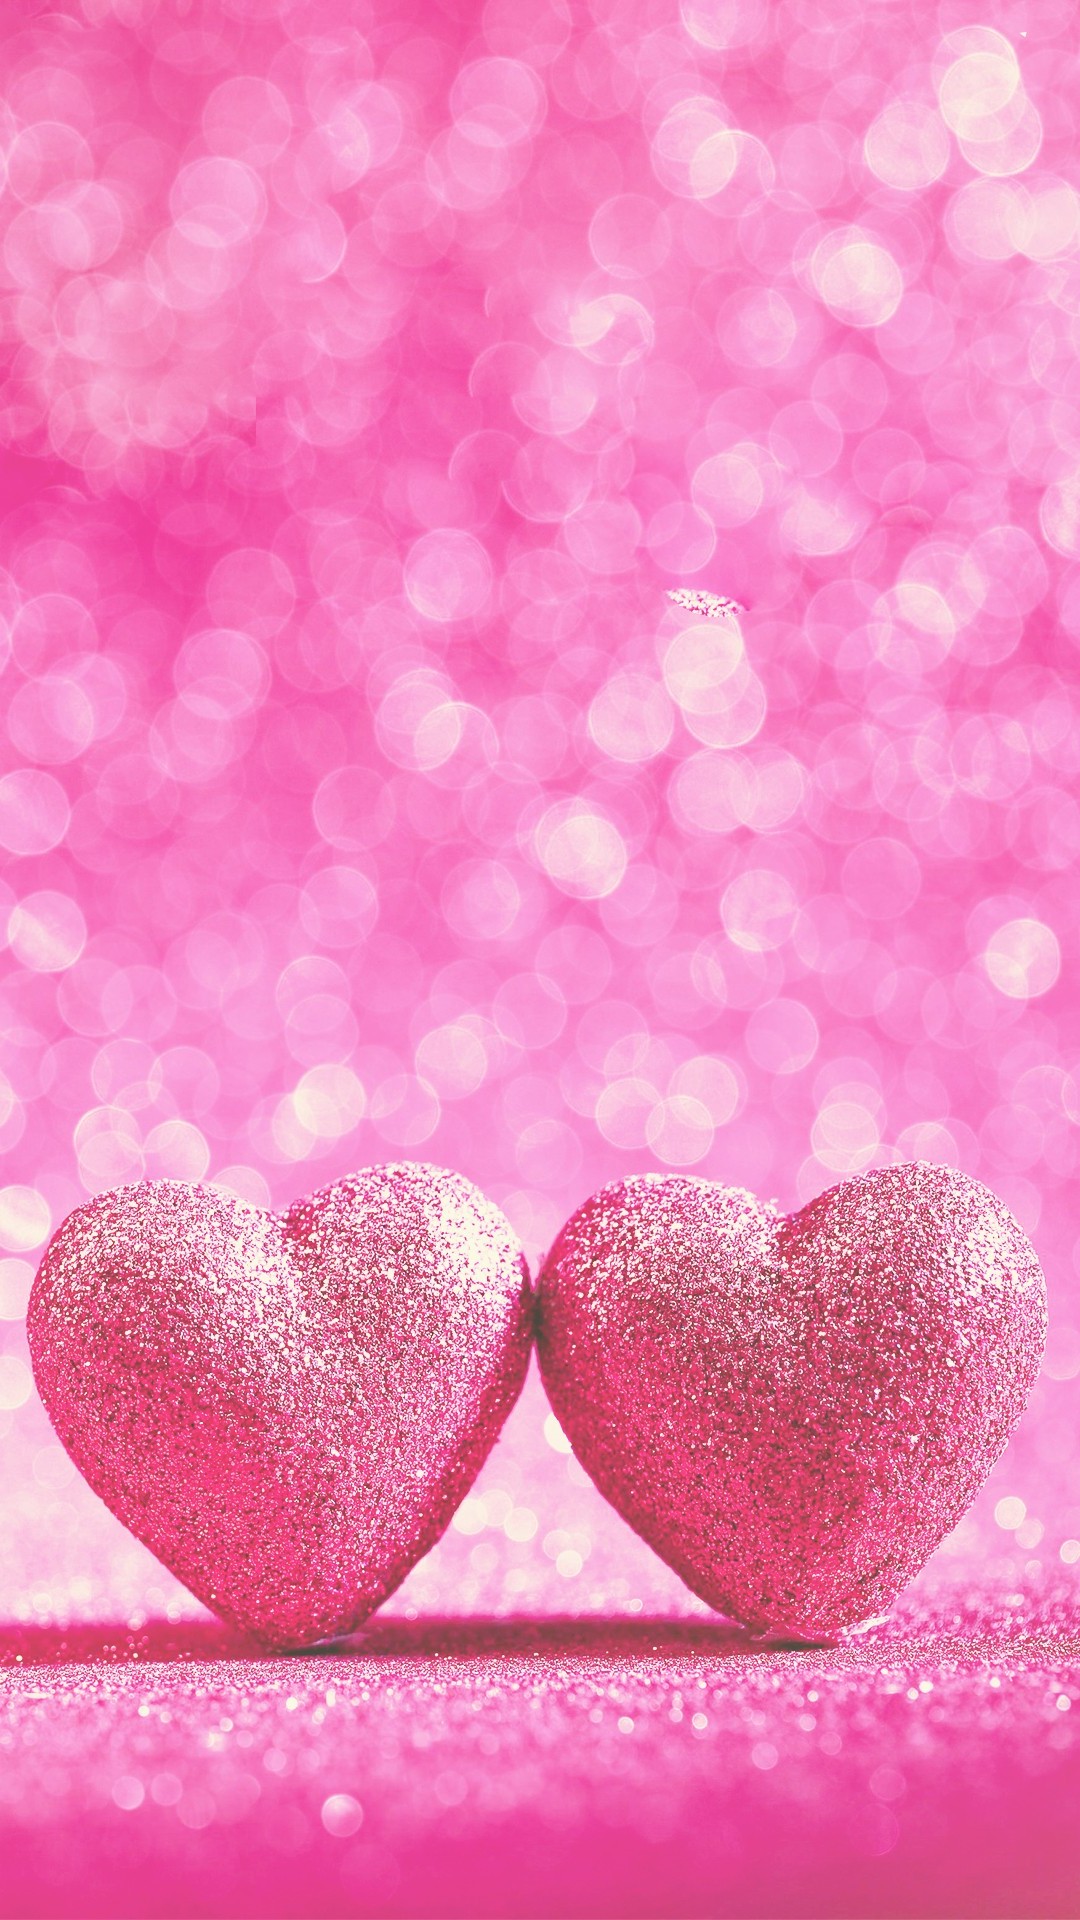 Pink Love Wallpaper Android - 2021 Android Wallpapers